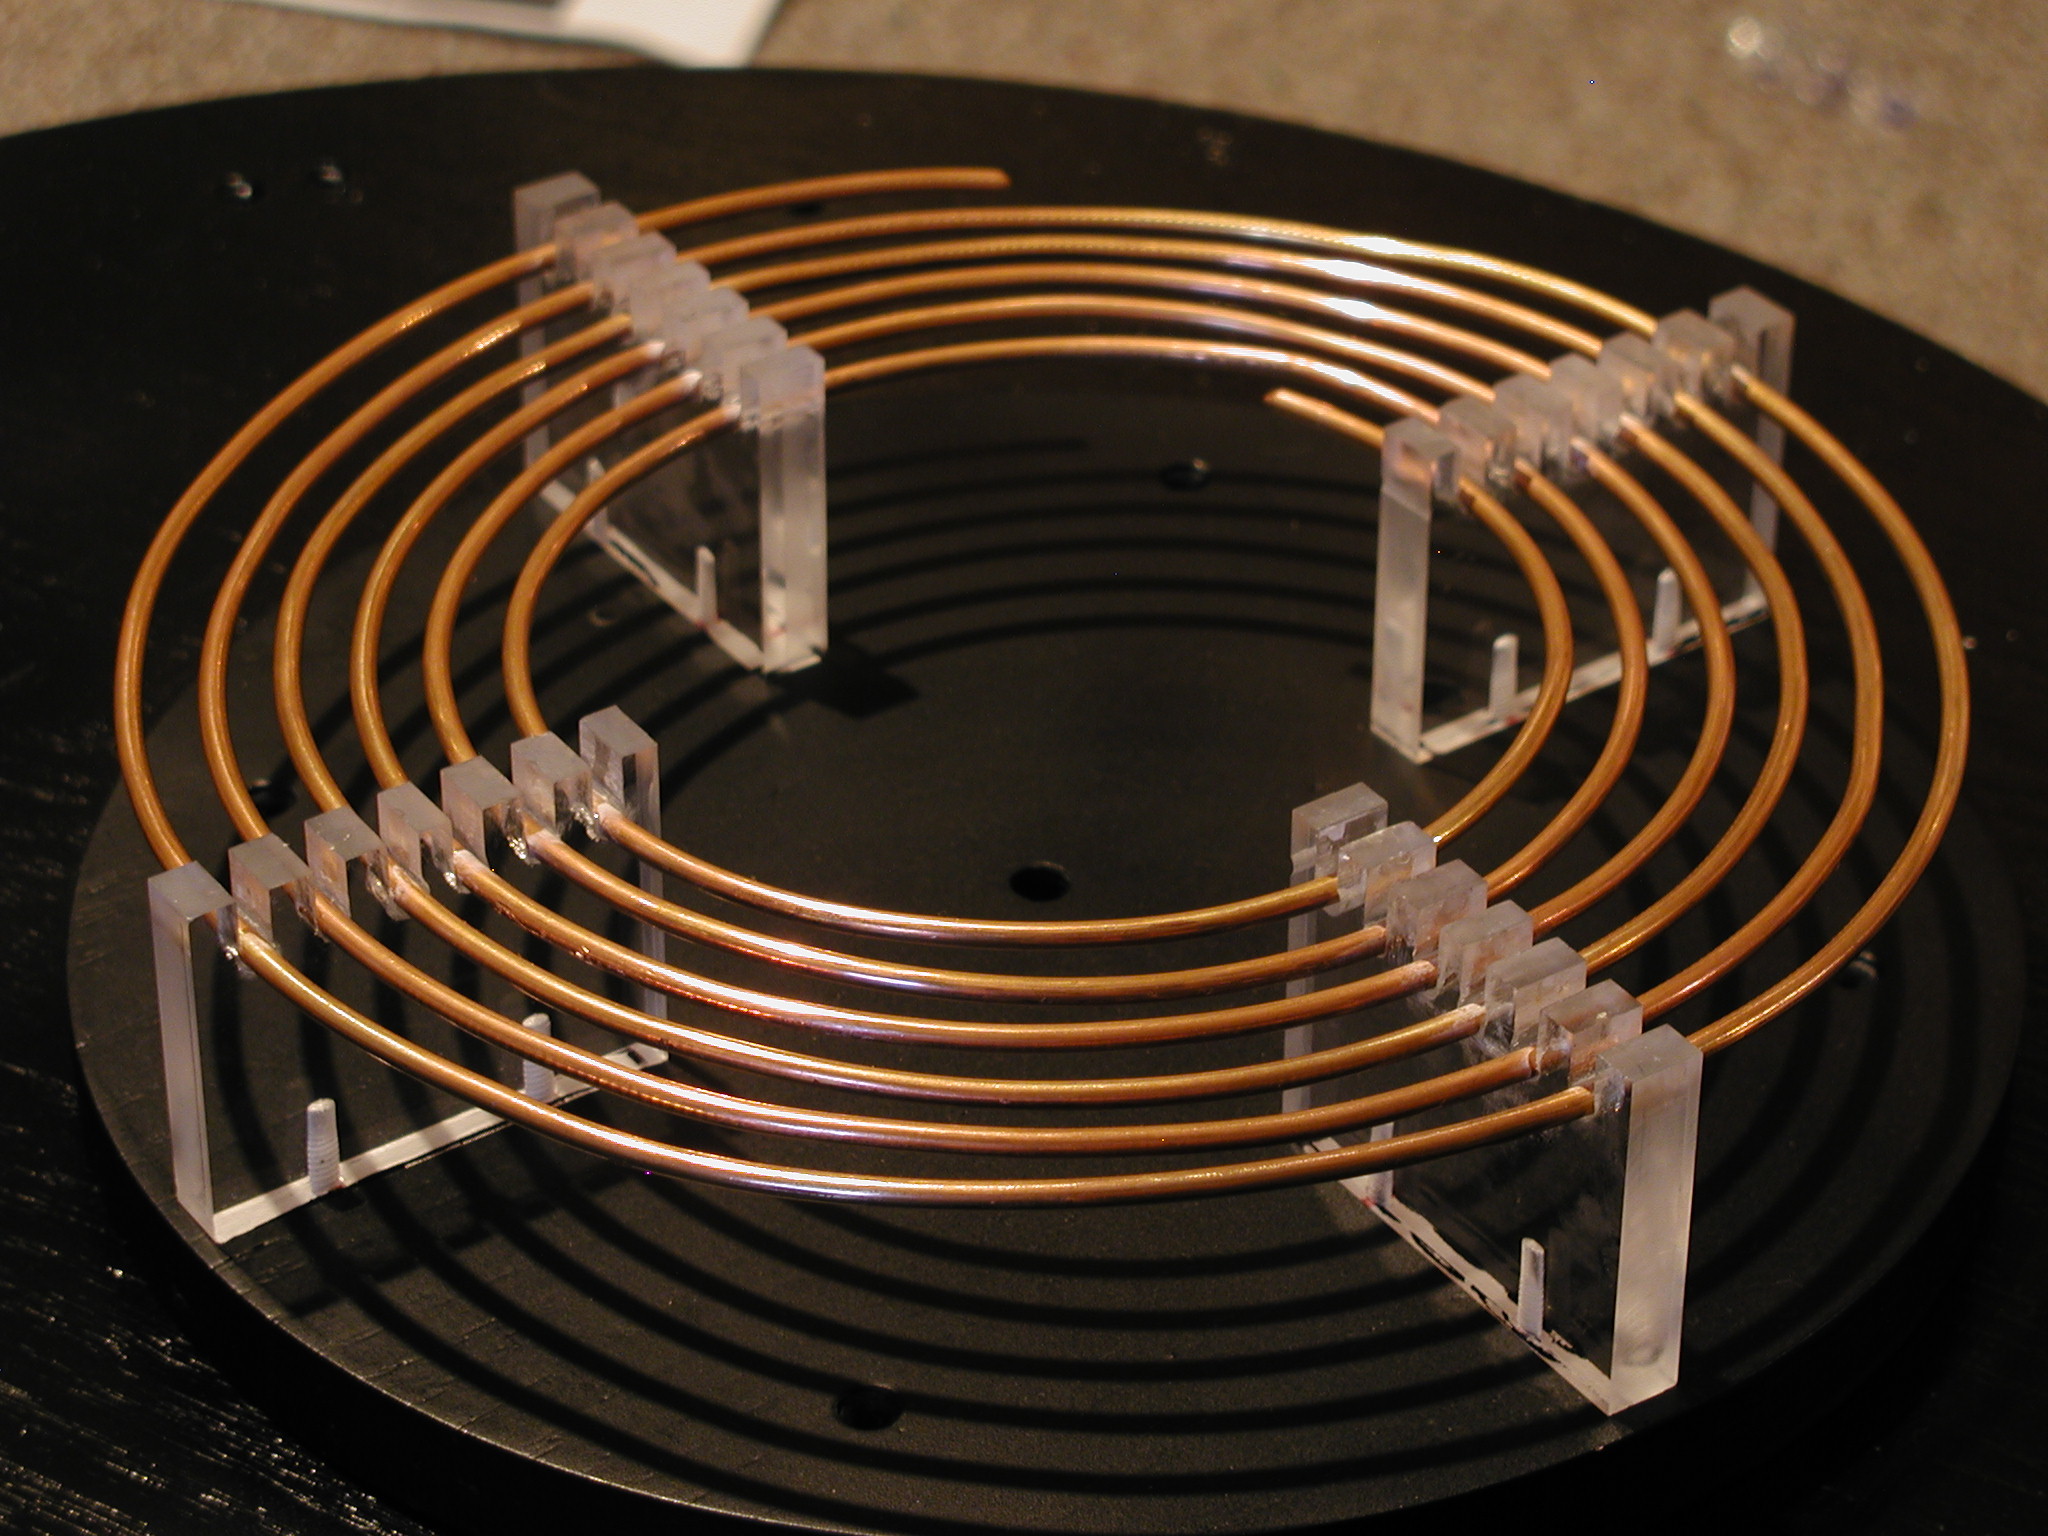 2048x1536 This is a here is a picture of the primary coil of my 2nd mini tesla coil,  the primary supports on the first coil. I made were removed to make a total  ...